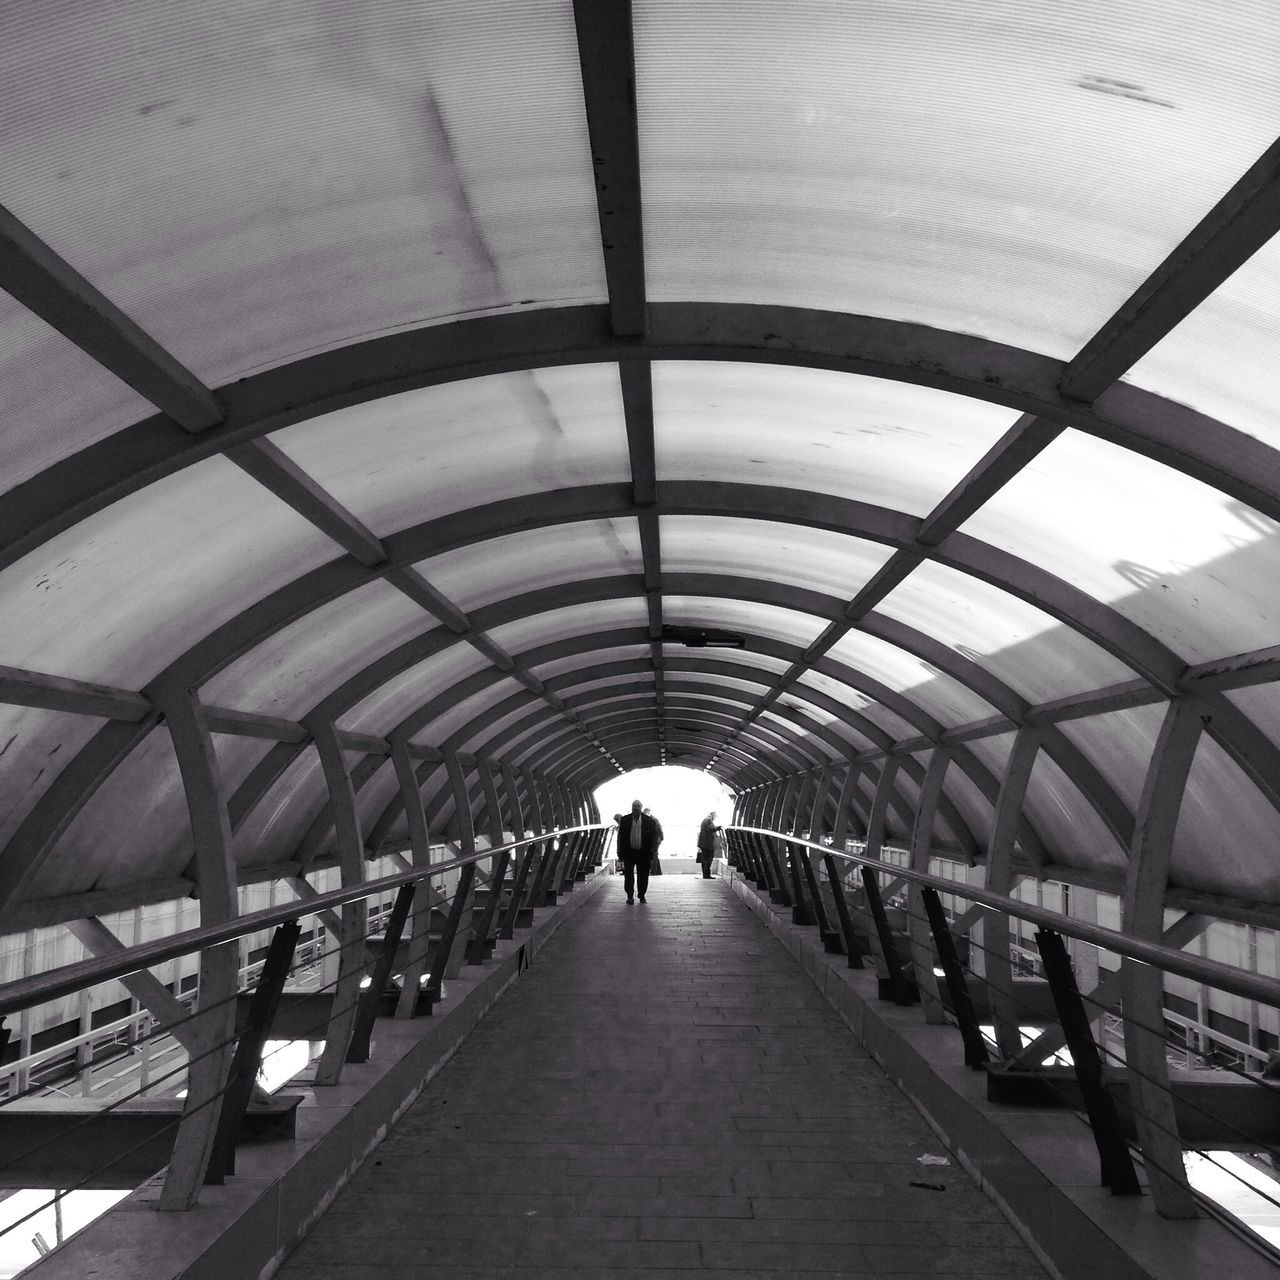 the way forward, indoors, architecture, diminishing perspective, built structure, ceiling, vanishing point, walking, connection, arch, men, railing, incidental people, walkway, footbridge, pedestrian walkway, in a row, tunnel, bridge - man made structure